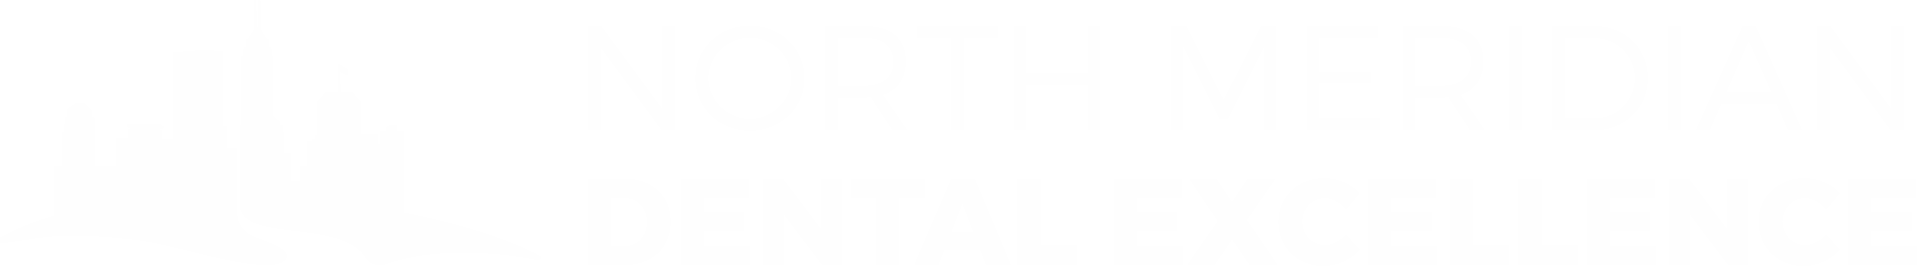 North Meridian Dental Excellence